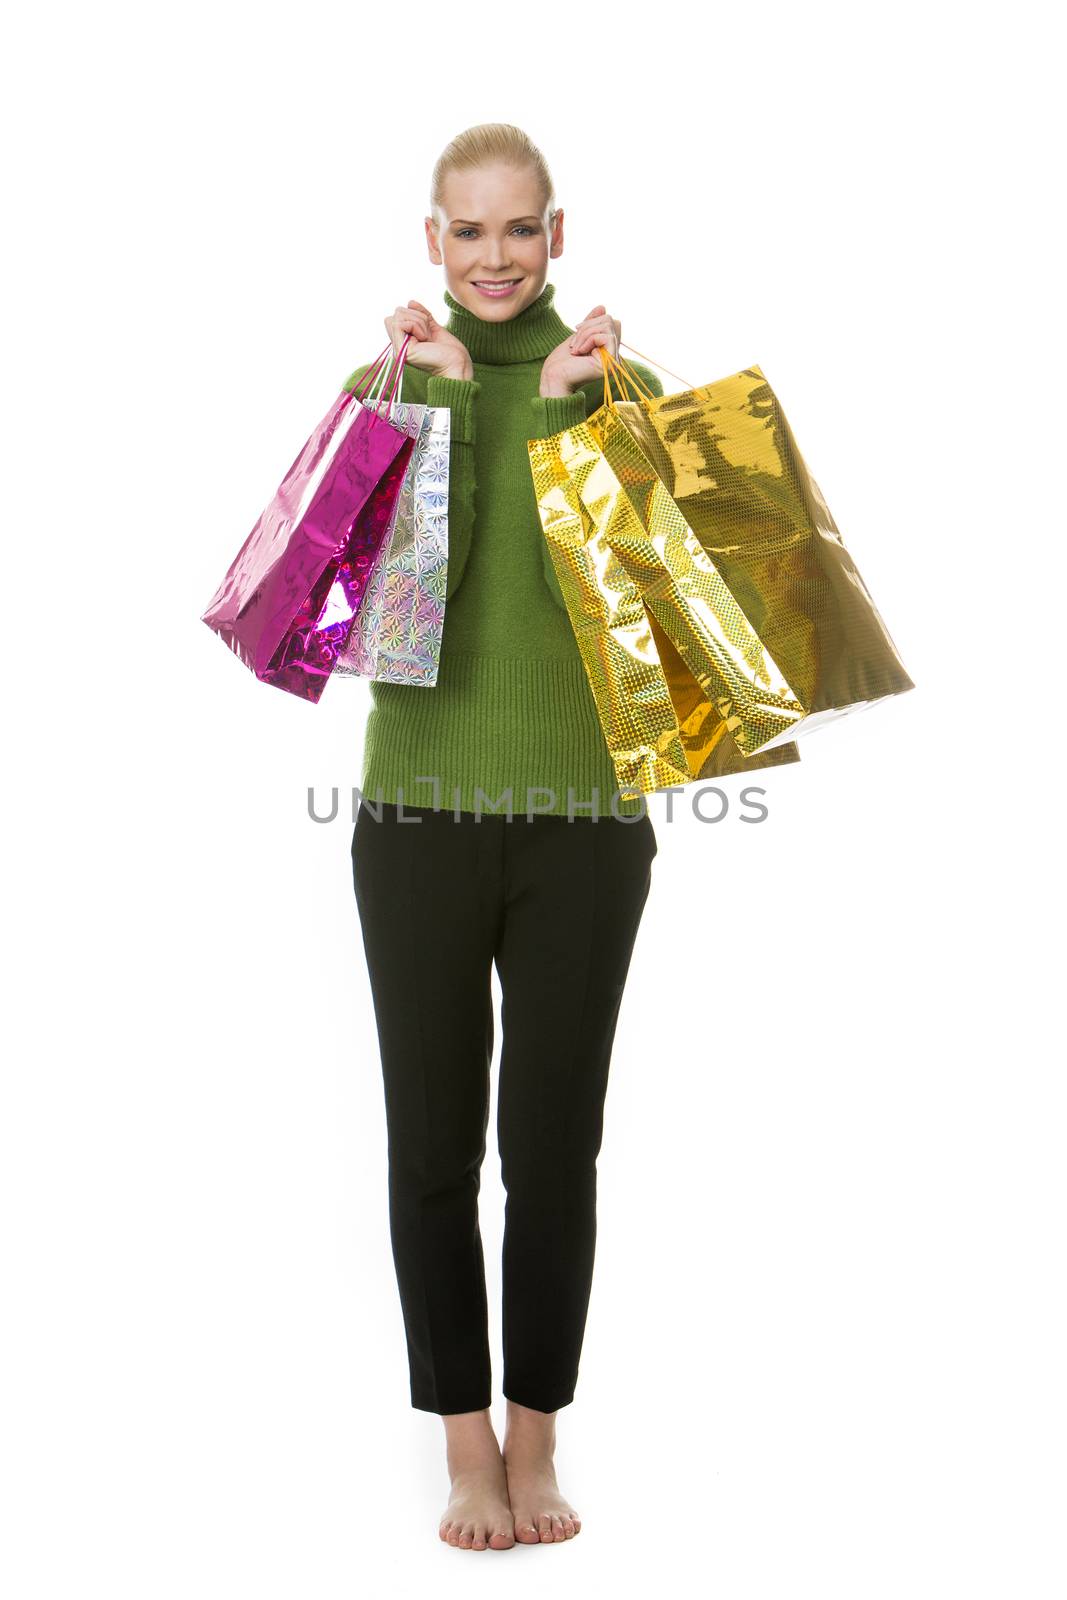 blonde smiling woman carrying gift bags and looking at the camera